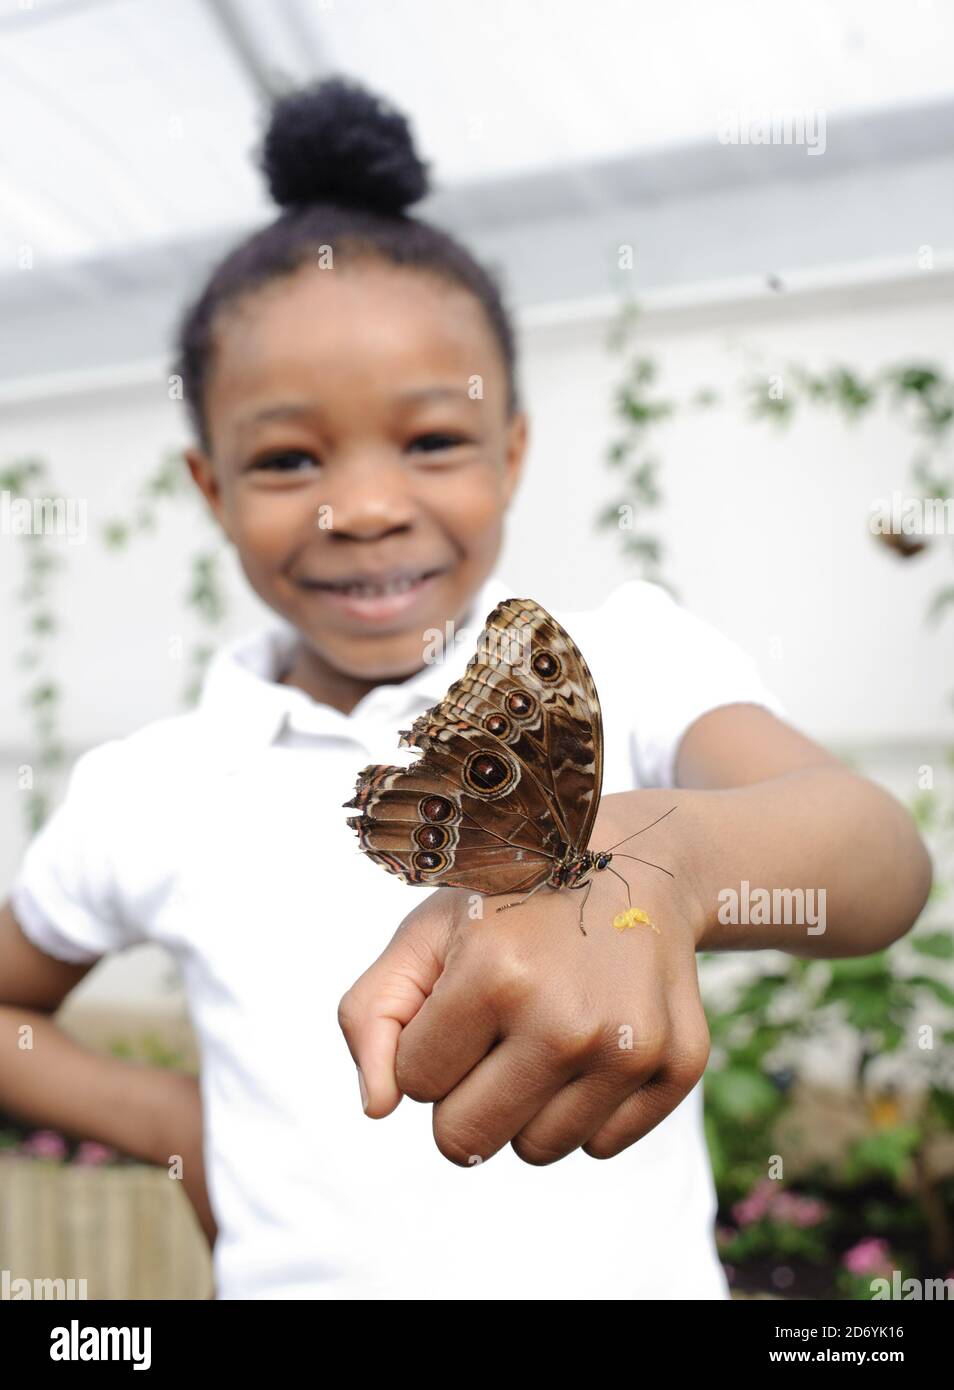 Year 1 pupil Lovetta, from the Nightingale Primary school in Hackney, pictured at 'Sensational Butterflies', a new exhibition featuring hundreds of tropical butterflies at the National History Museum in south Kensington, London. Stock Photo